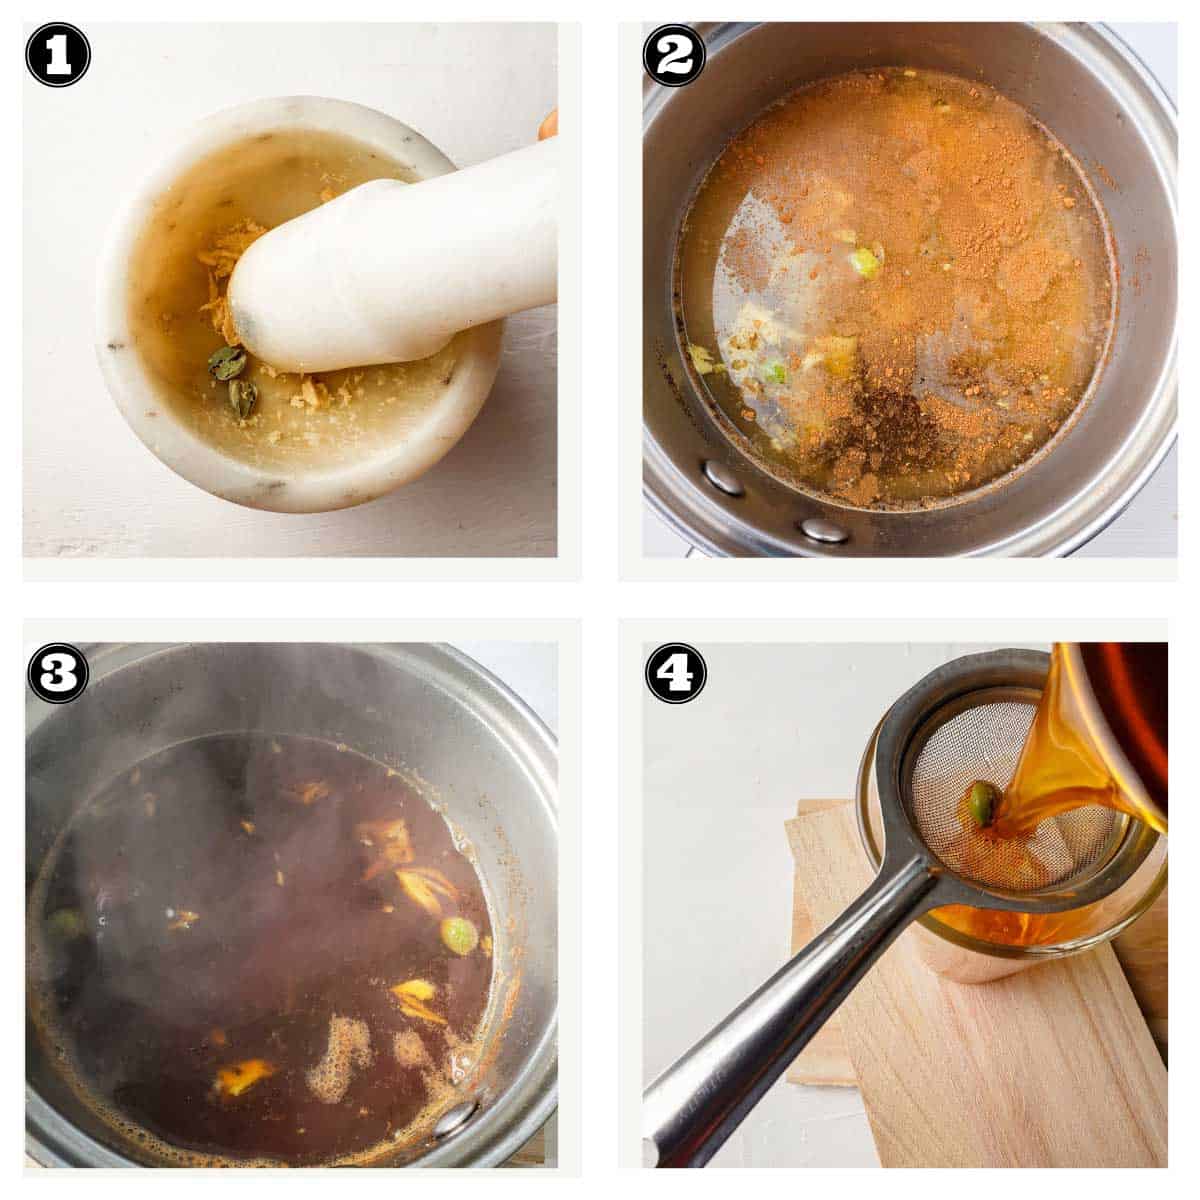 steps involved in making Indian chai